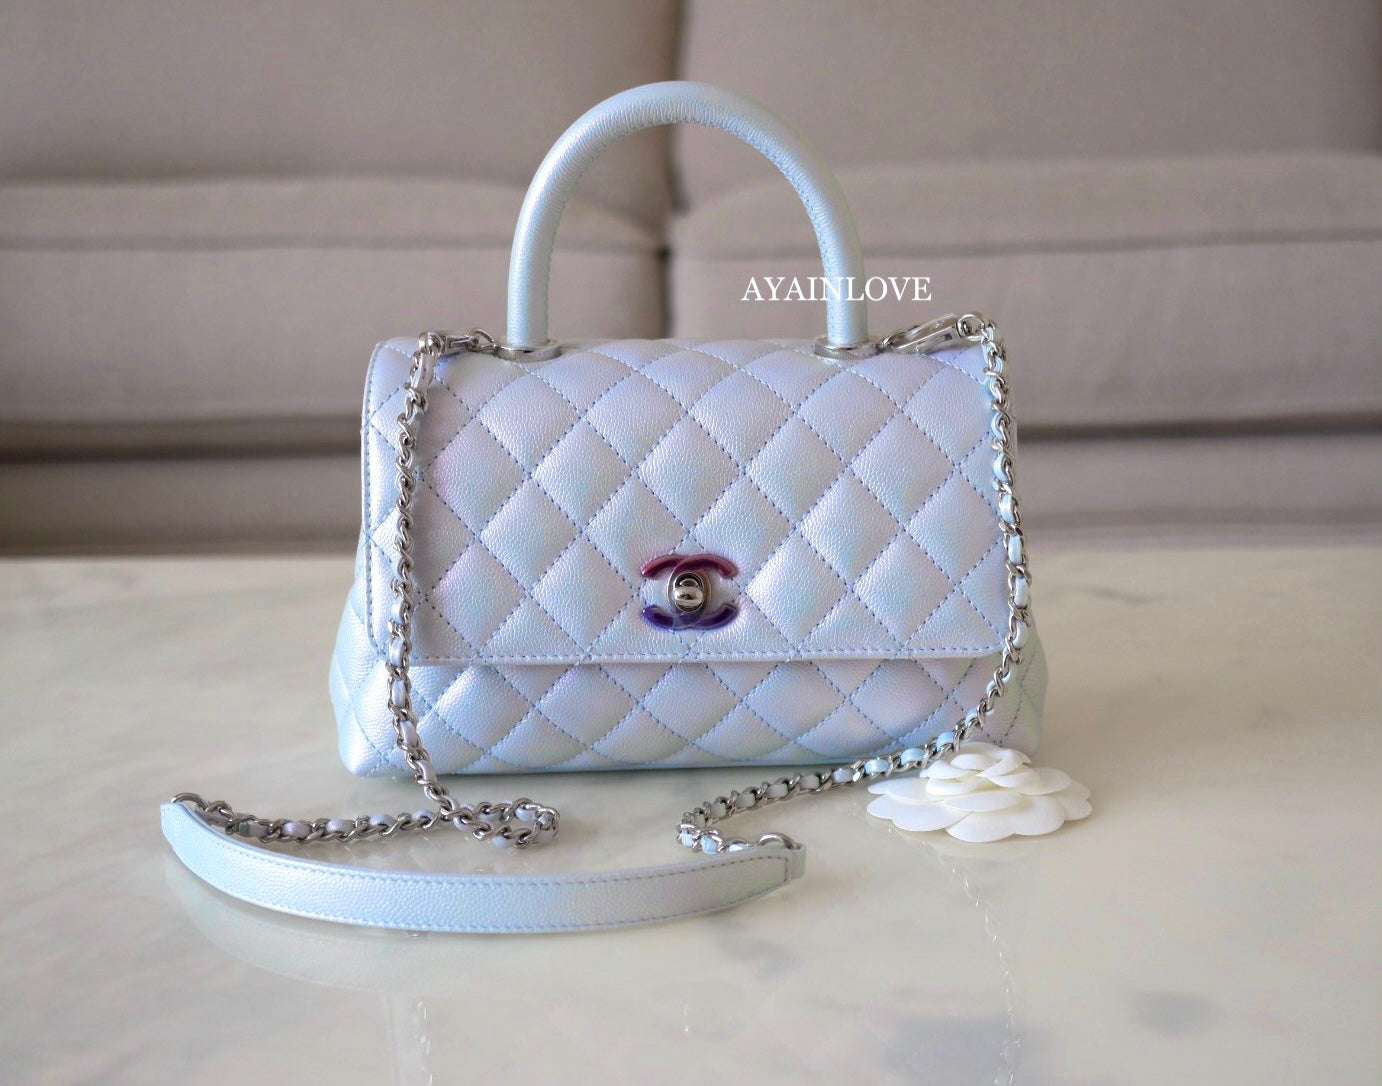 CHANEL COCO HANDLE MINI FULL REVIEW// Size, Price, Which Size